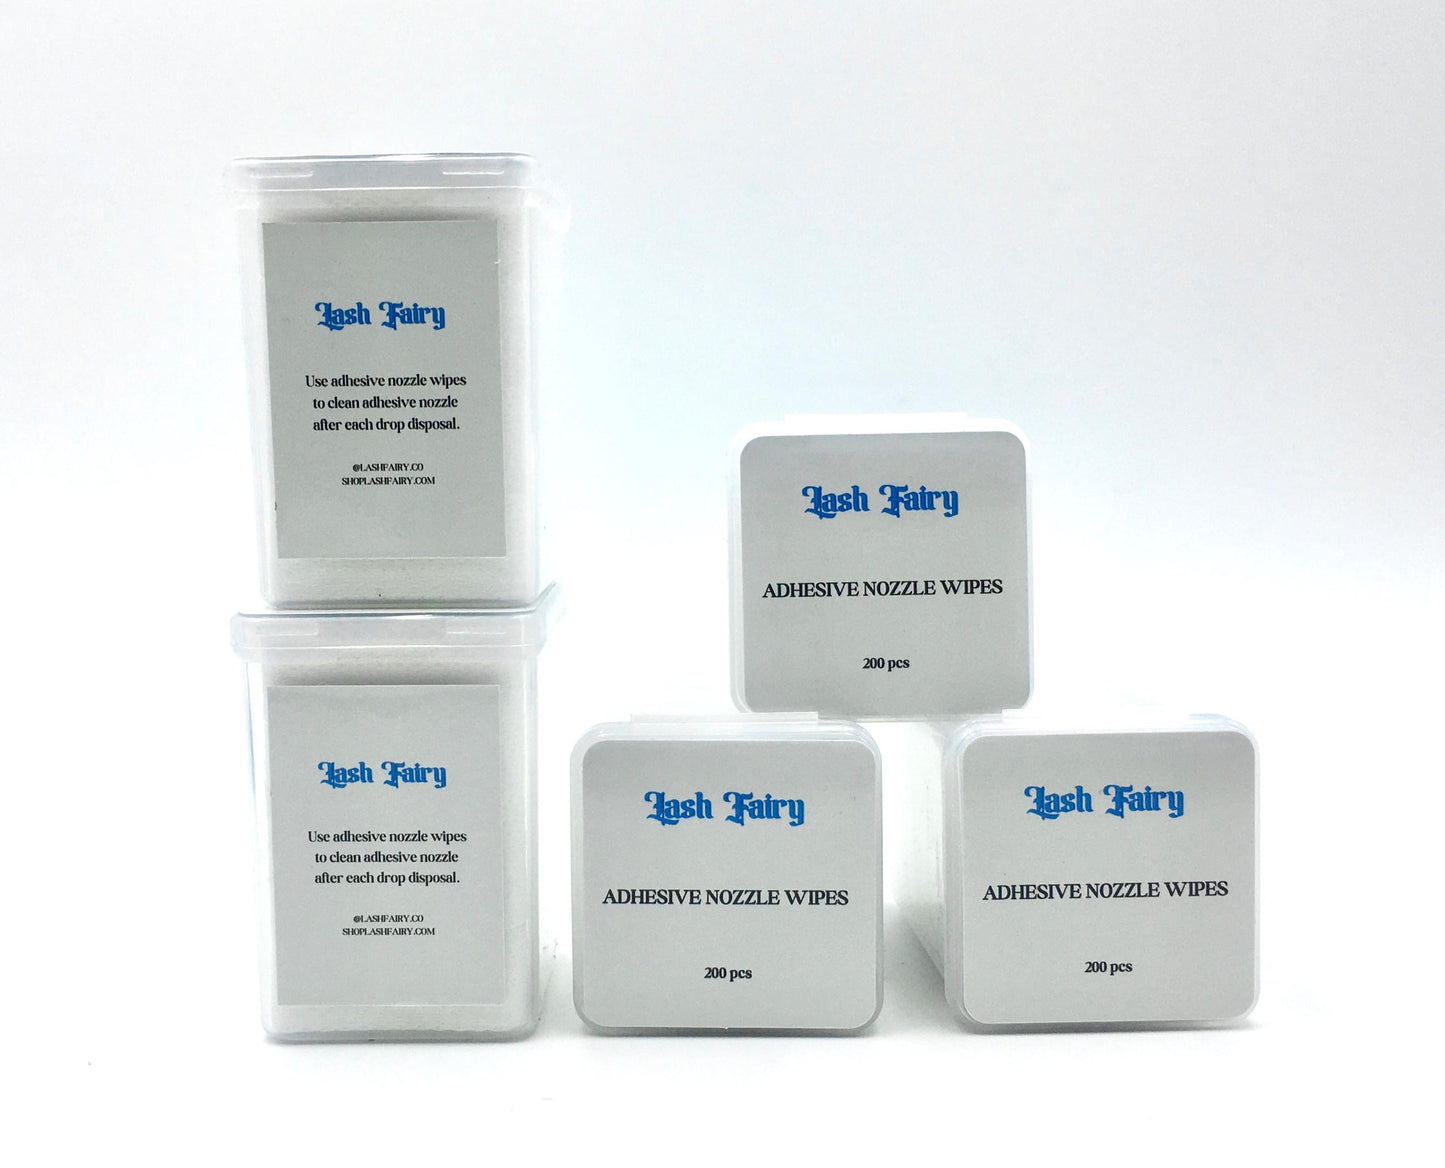 Lint-Free adhesive nozzle wipes